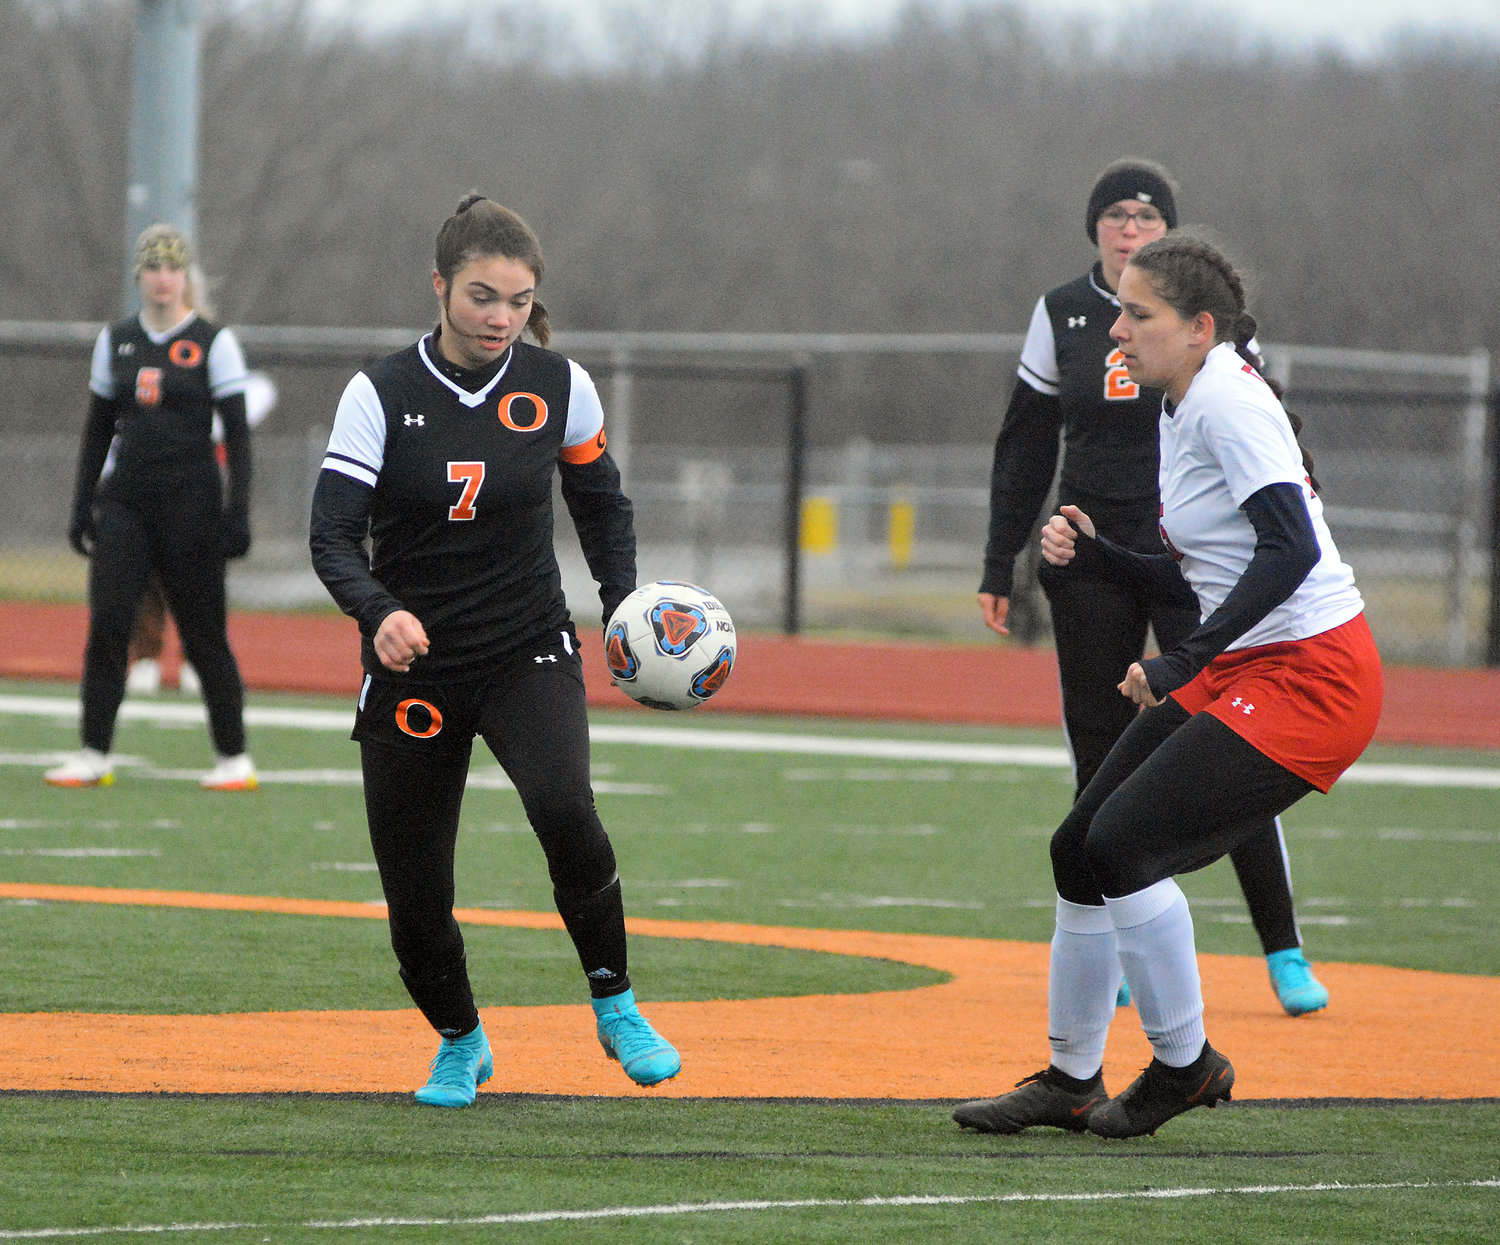 Kylie Kitchen (center) looks to play a ball as it comes down to the ground with Dutchgirl teammates Katie Loyd (far left) and Leah Reed (far right) watching the action unfold from behind. OHS is scheduled to compete this week in the Dixon Girls Soccer Tournament beginning tonight (Wednesday).